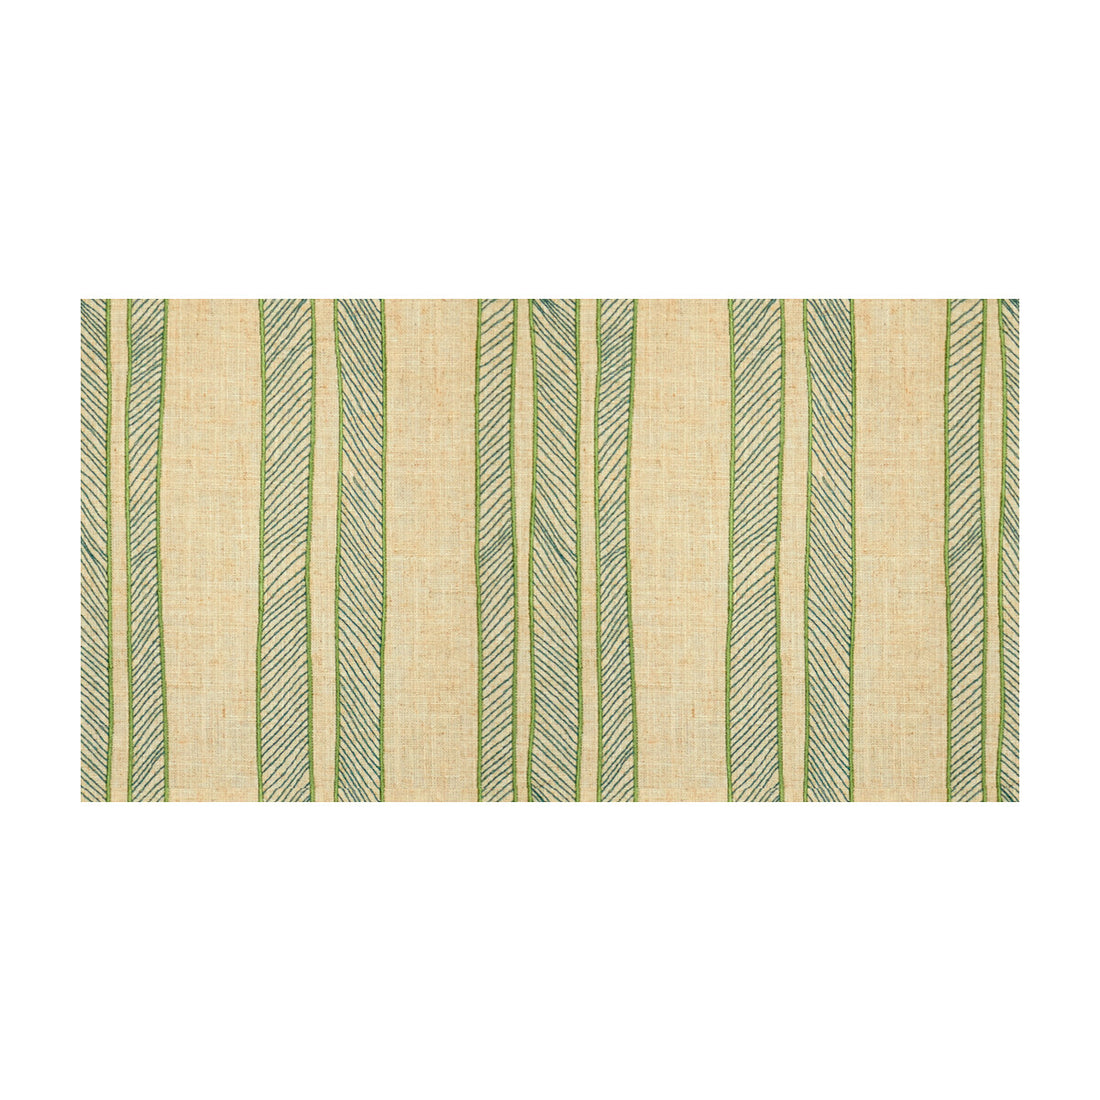 Cords fabric in fern color - pattern PF50387.4.0 - by Baker Lifestyle in the Waterside collection